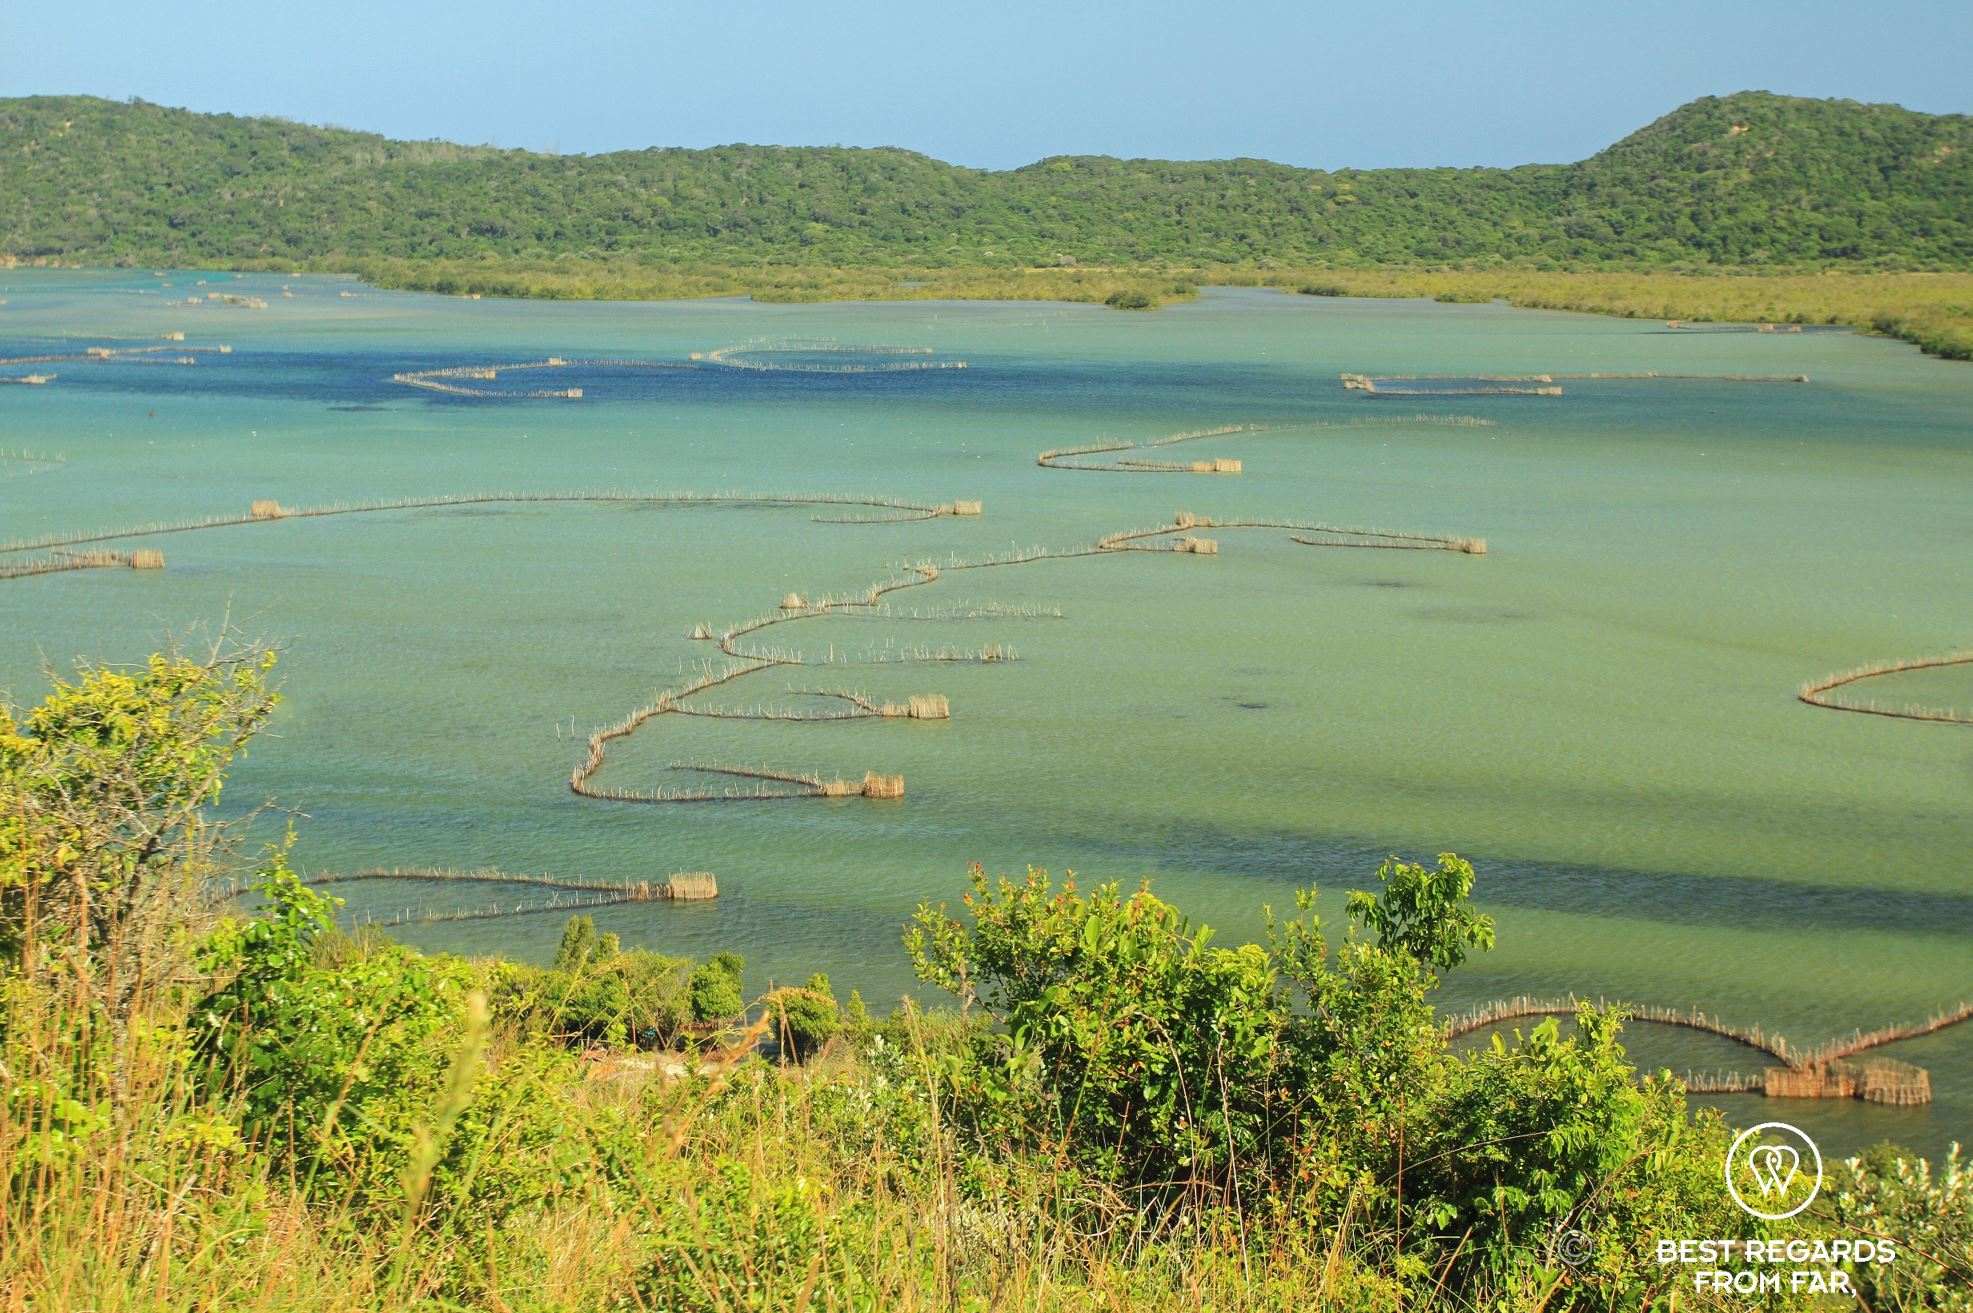 Fish traps in the Kosi Bay Lake, South Africa